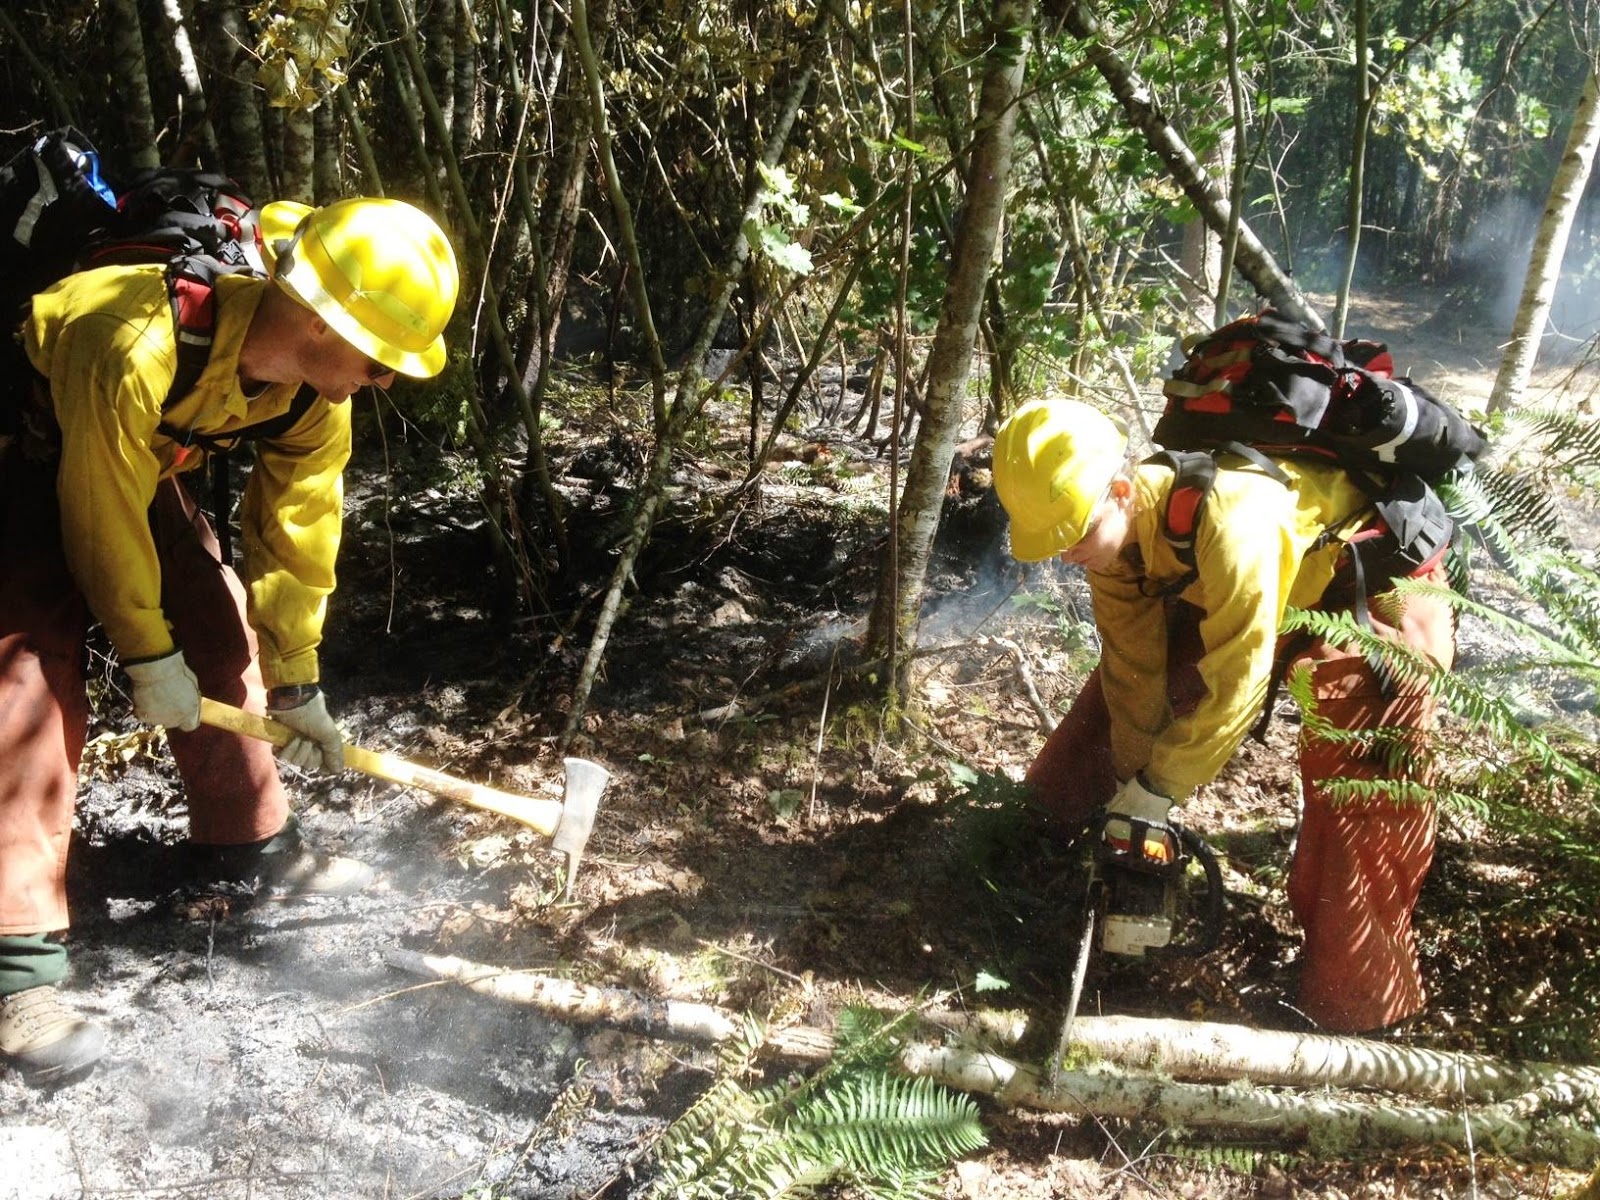 Two WCC AmeriCorps members wearing yellow hard hats use hand tools to clear trail near recently burned ground.